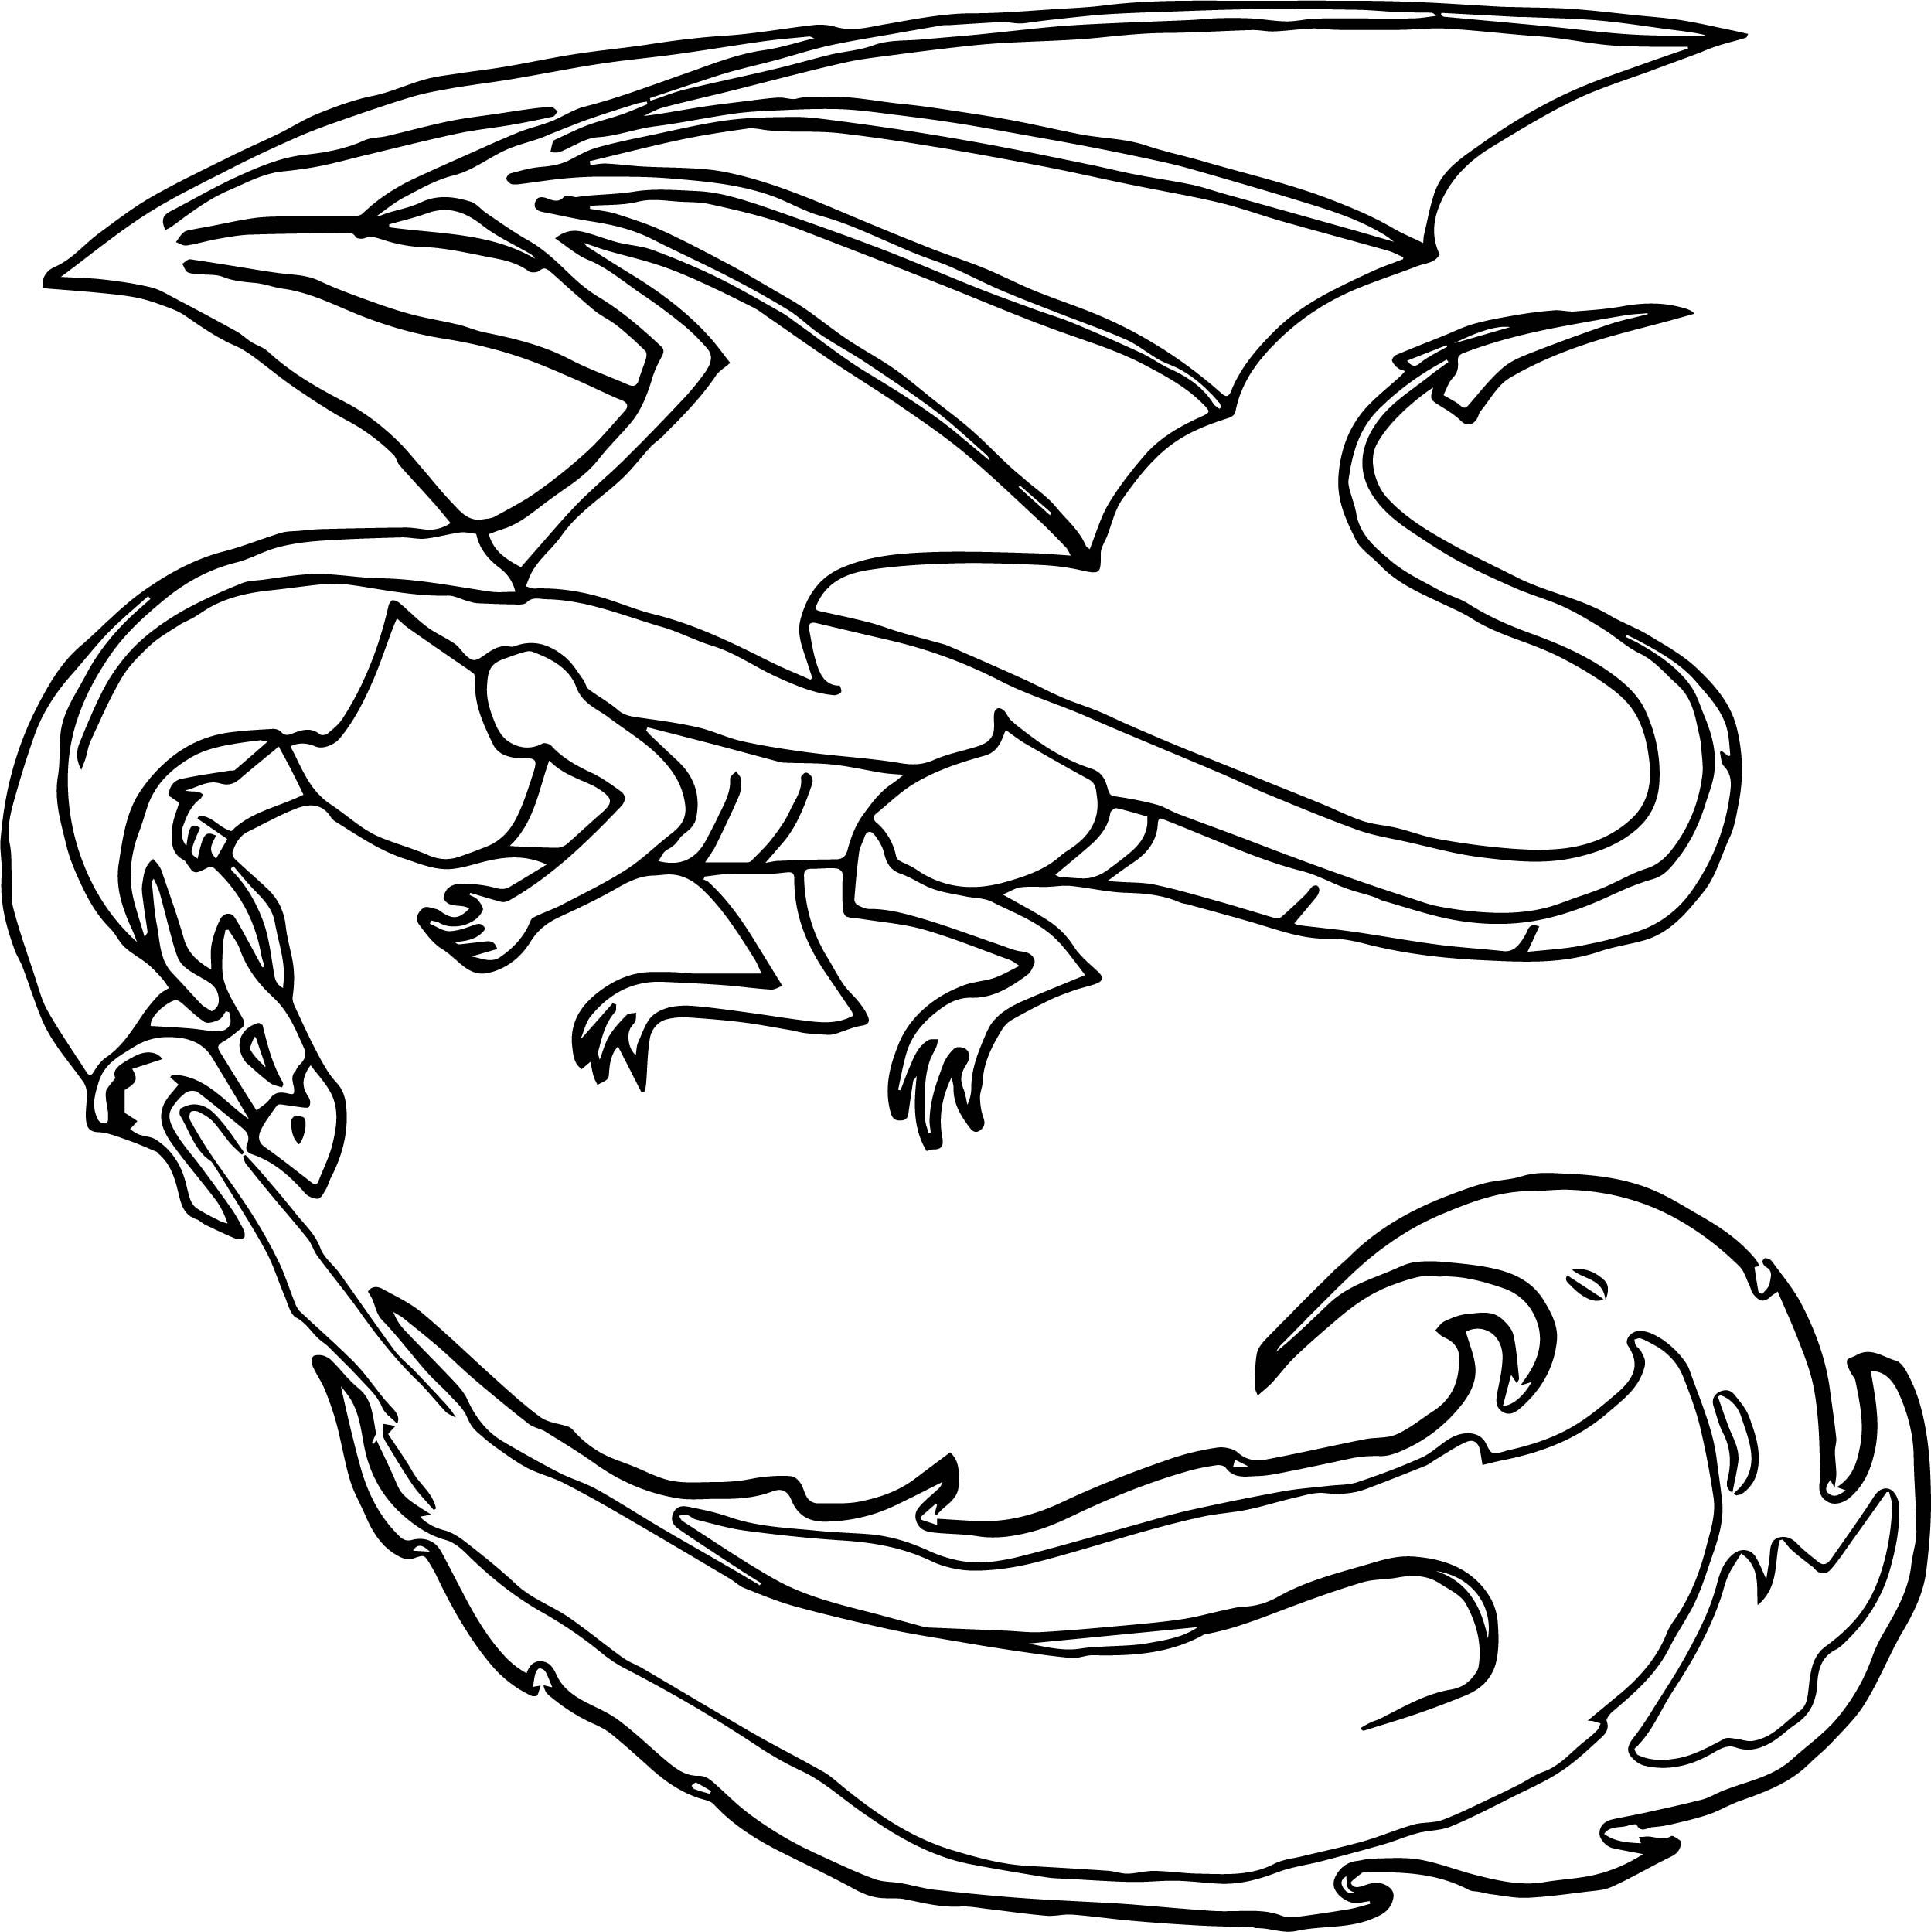 awesome Dragon Fire Coloring Page | Dragon coloring page, Coloring pages,  Fire breathing dragon